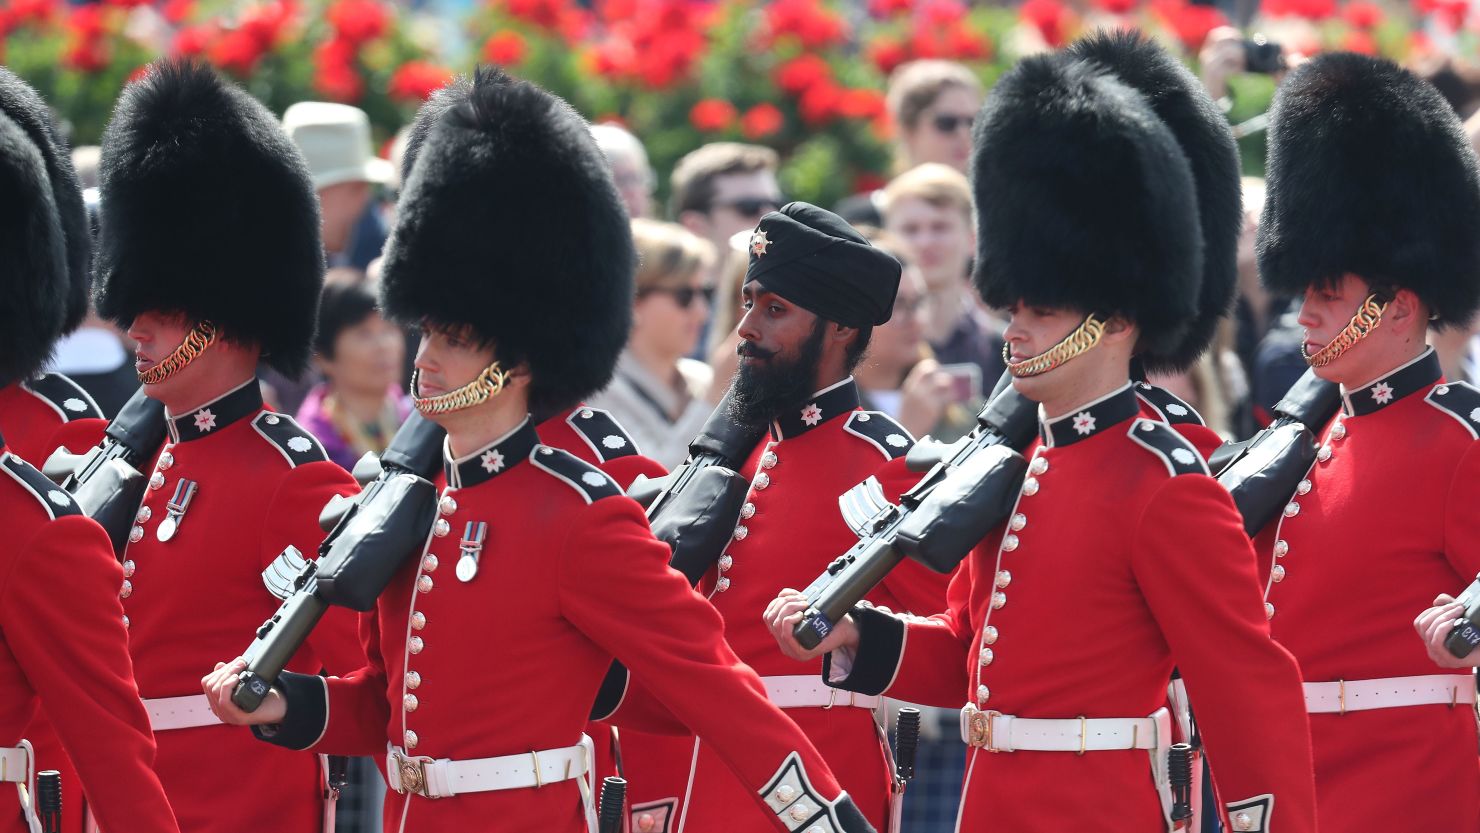 Coldstream Guards soldier Charanpreet Singh Lall dons a turban in Saturday's Trooping the Colour event.